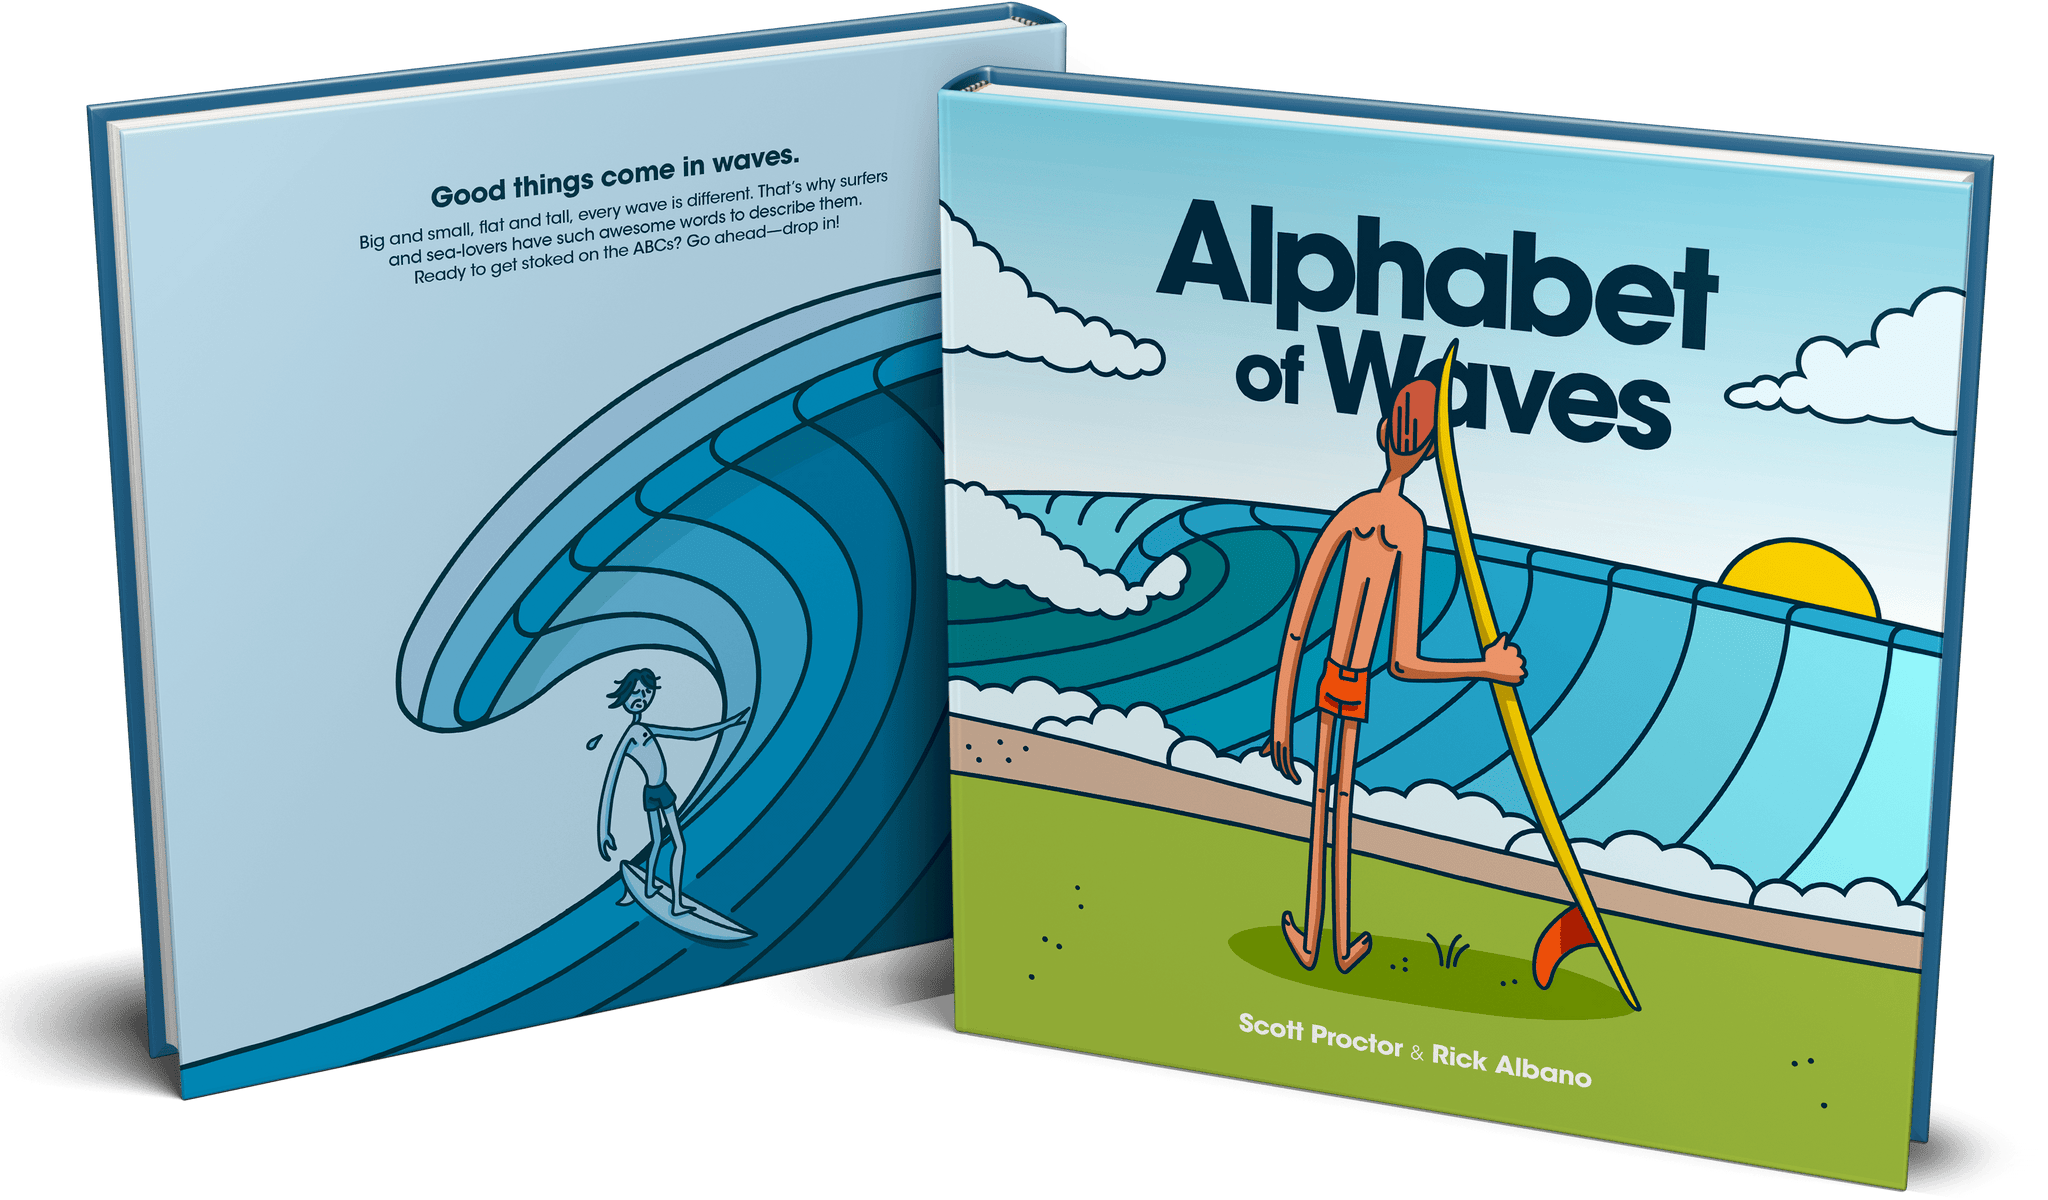 The Alphabet of Waves